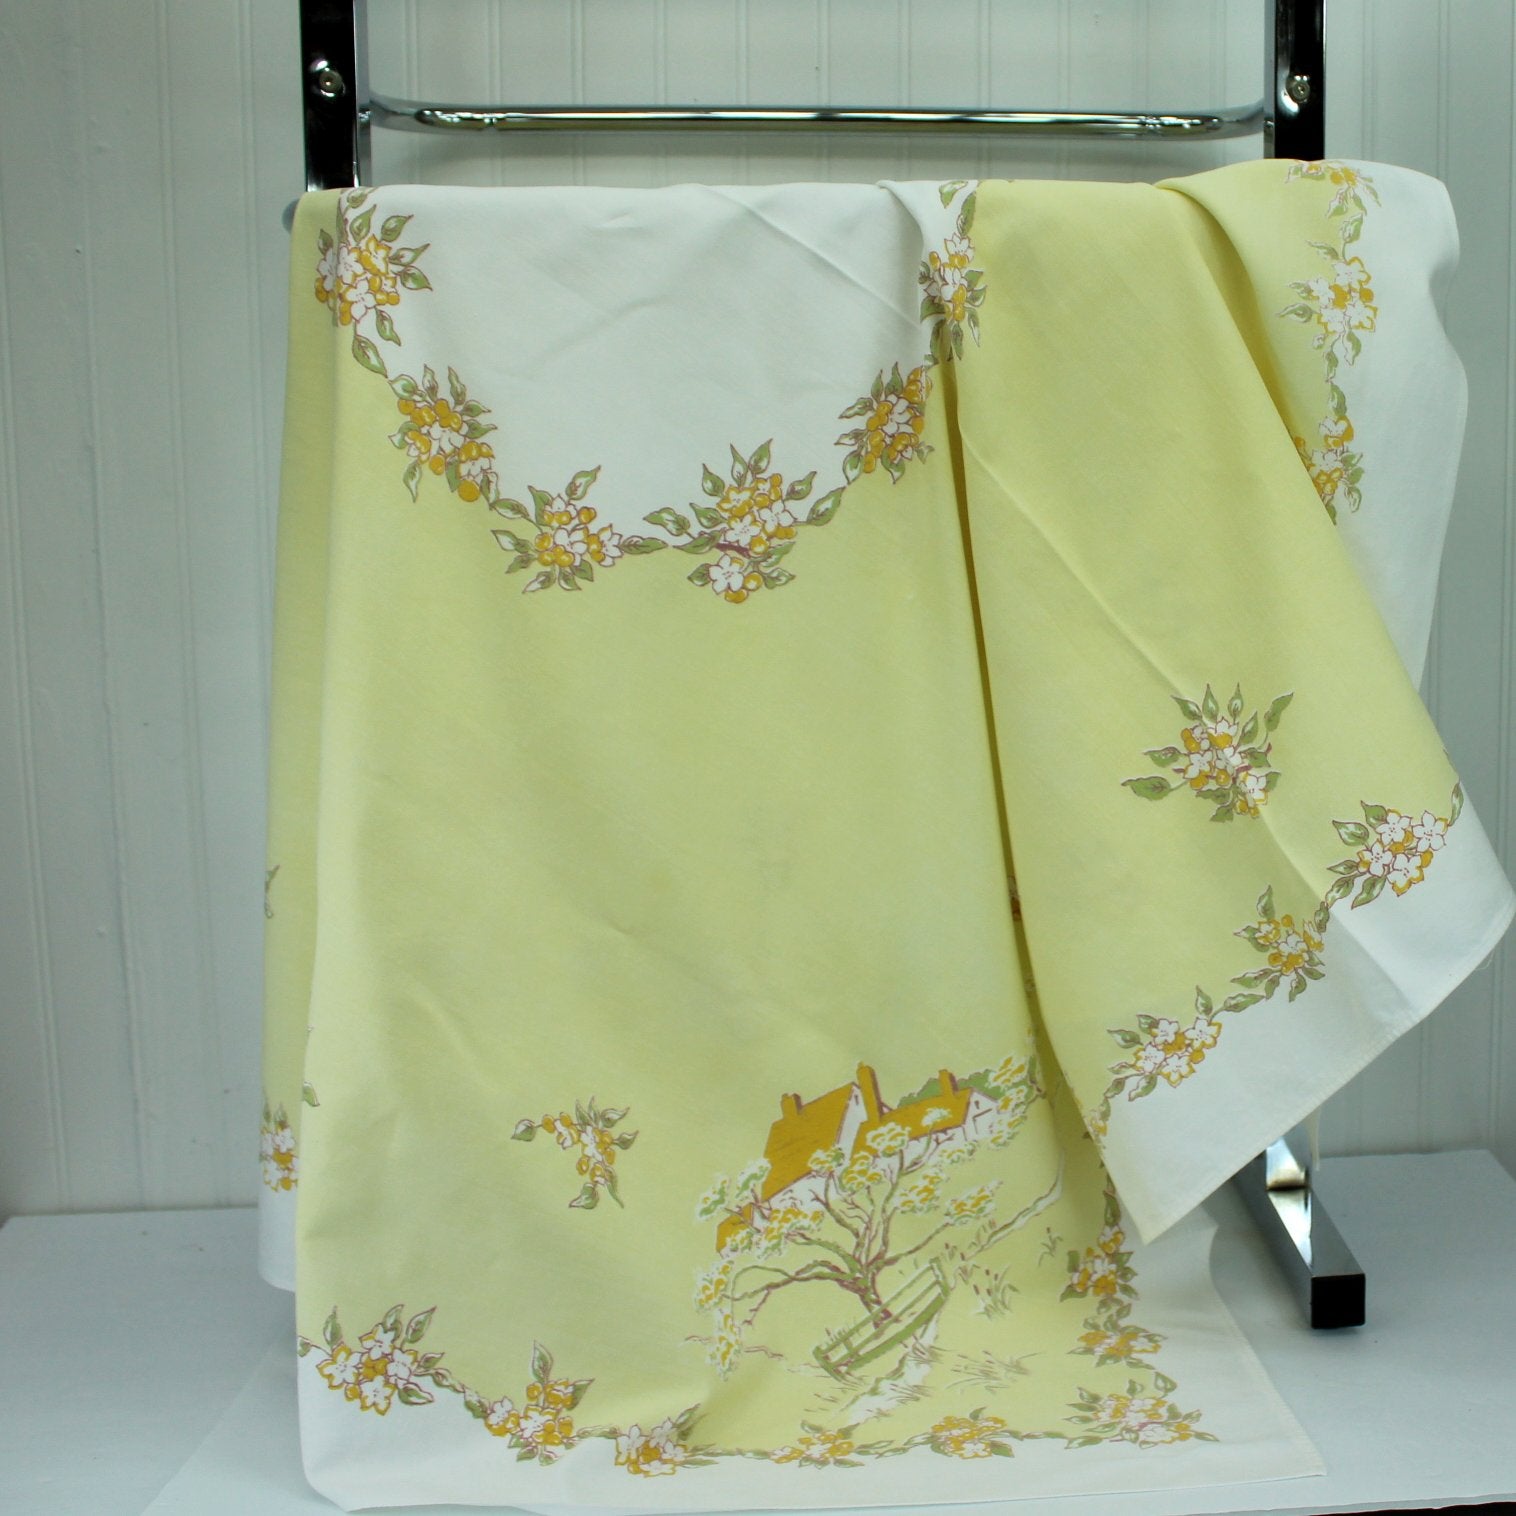 Kate Greenaway  Leacock "Somerset" Tablecloth Yellow White Cottage Design